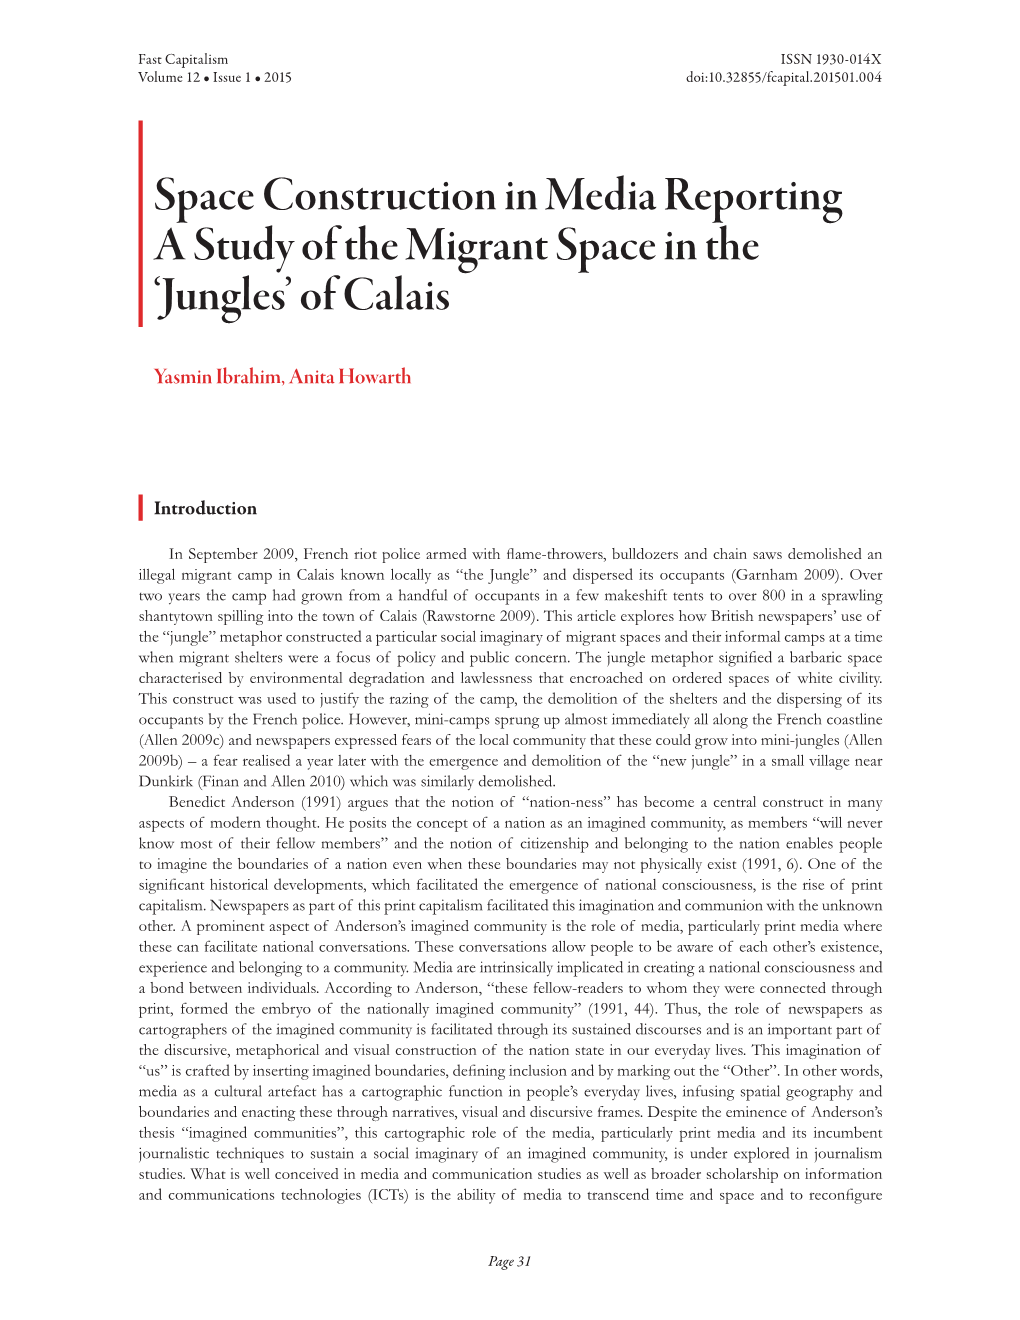 Space Construction in Media Reporting a Study of the Migrant Space in the ‘Jungles’ of Calais